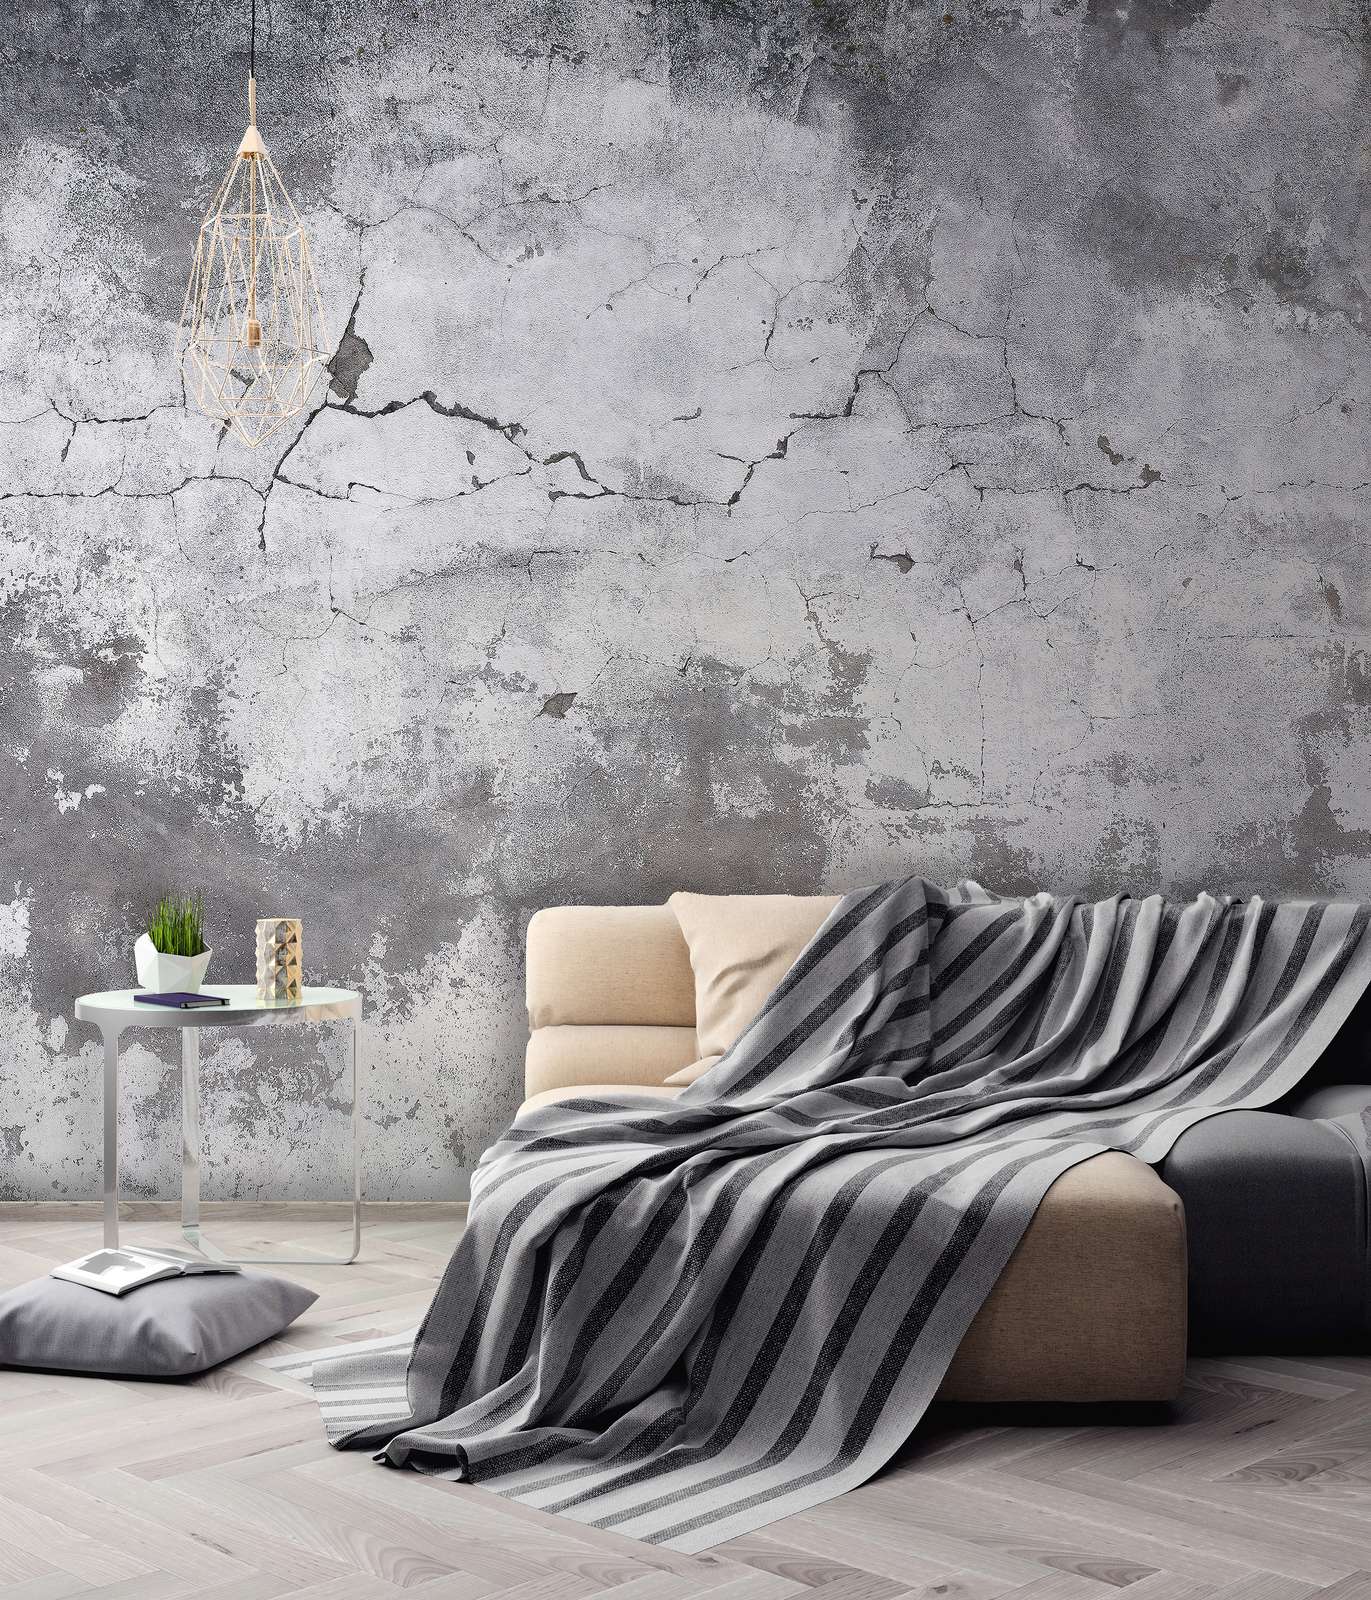             Vintage Style Used Look Concrete Wall Wall Mural - Grey
        